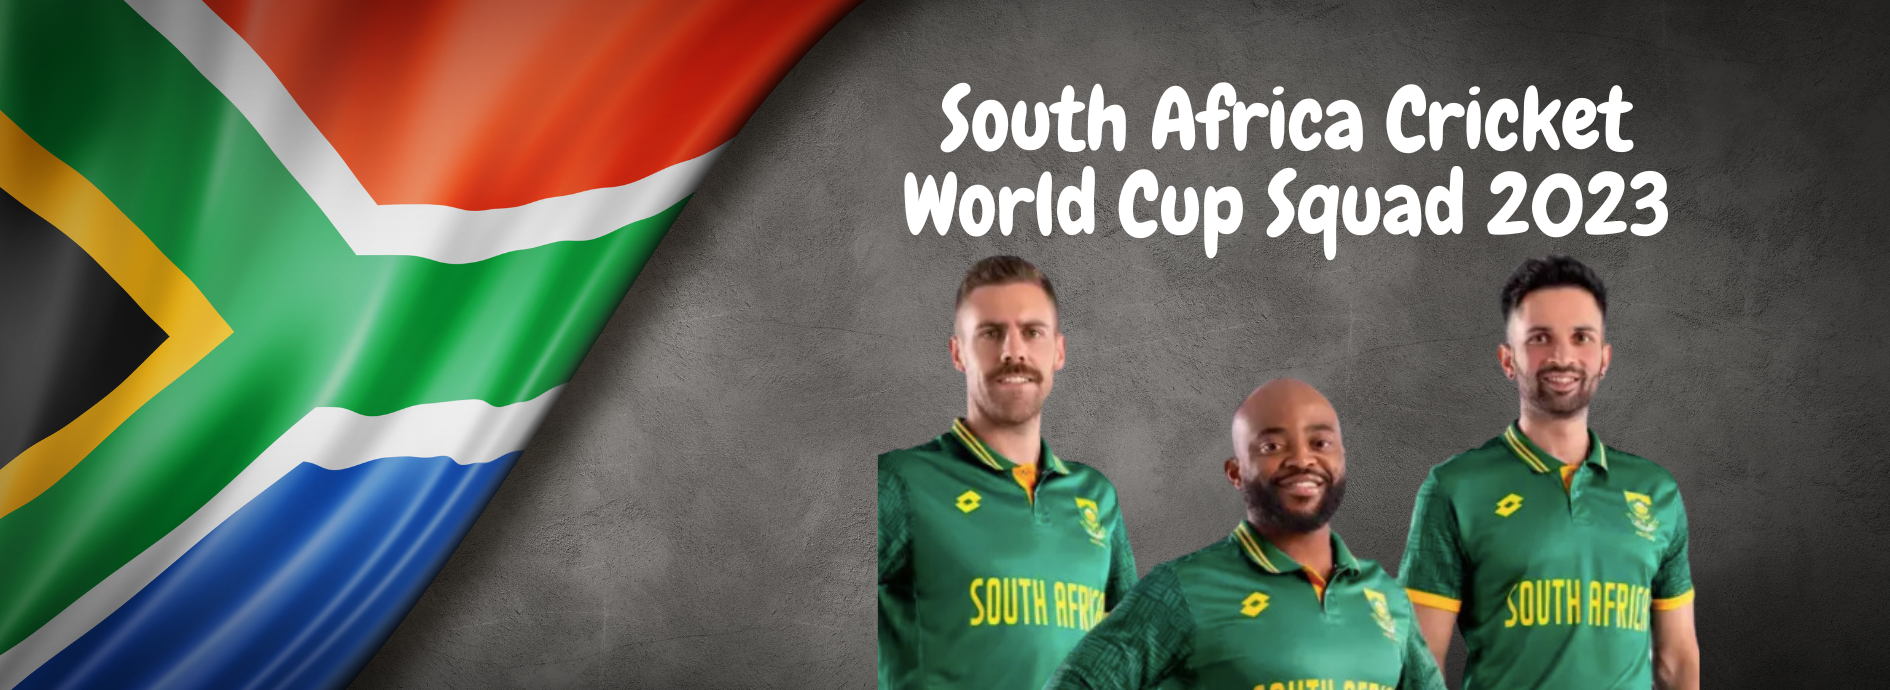 south africa cricket world cup squad 2023